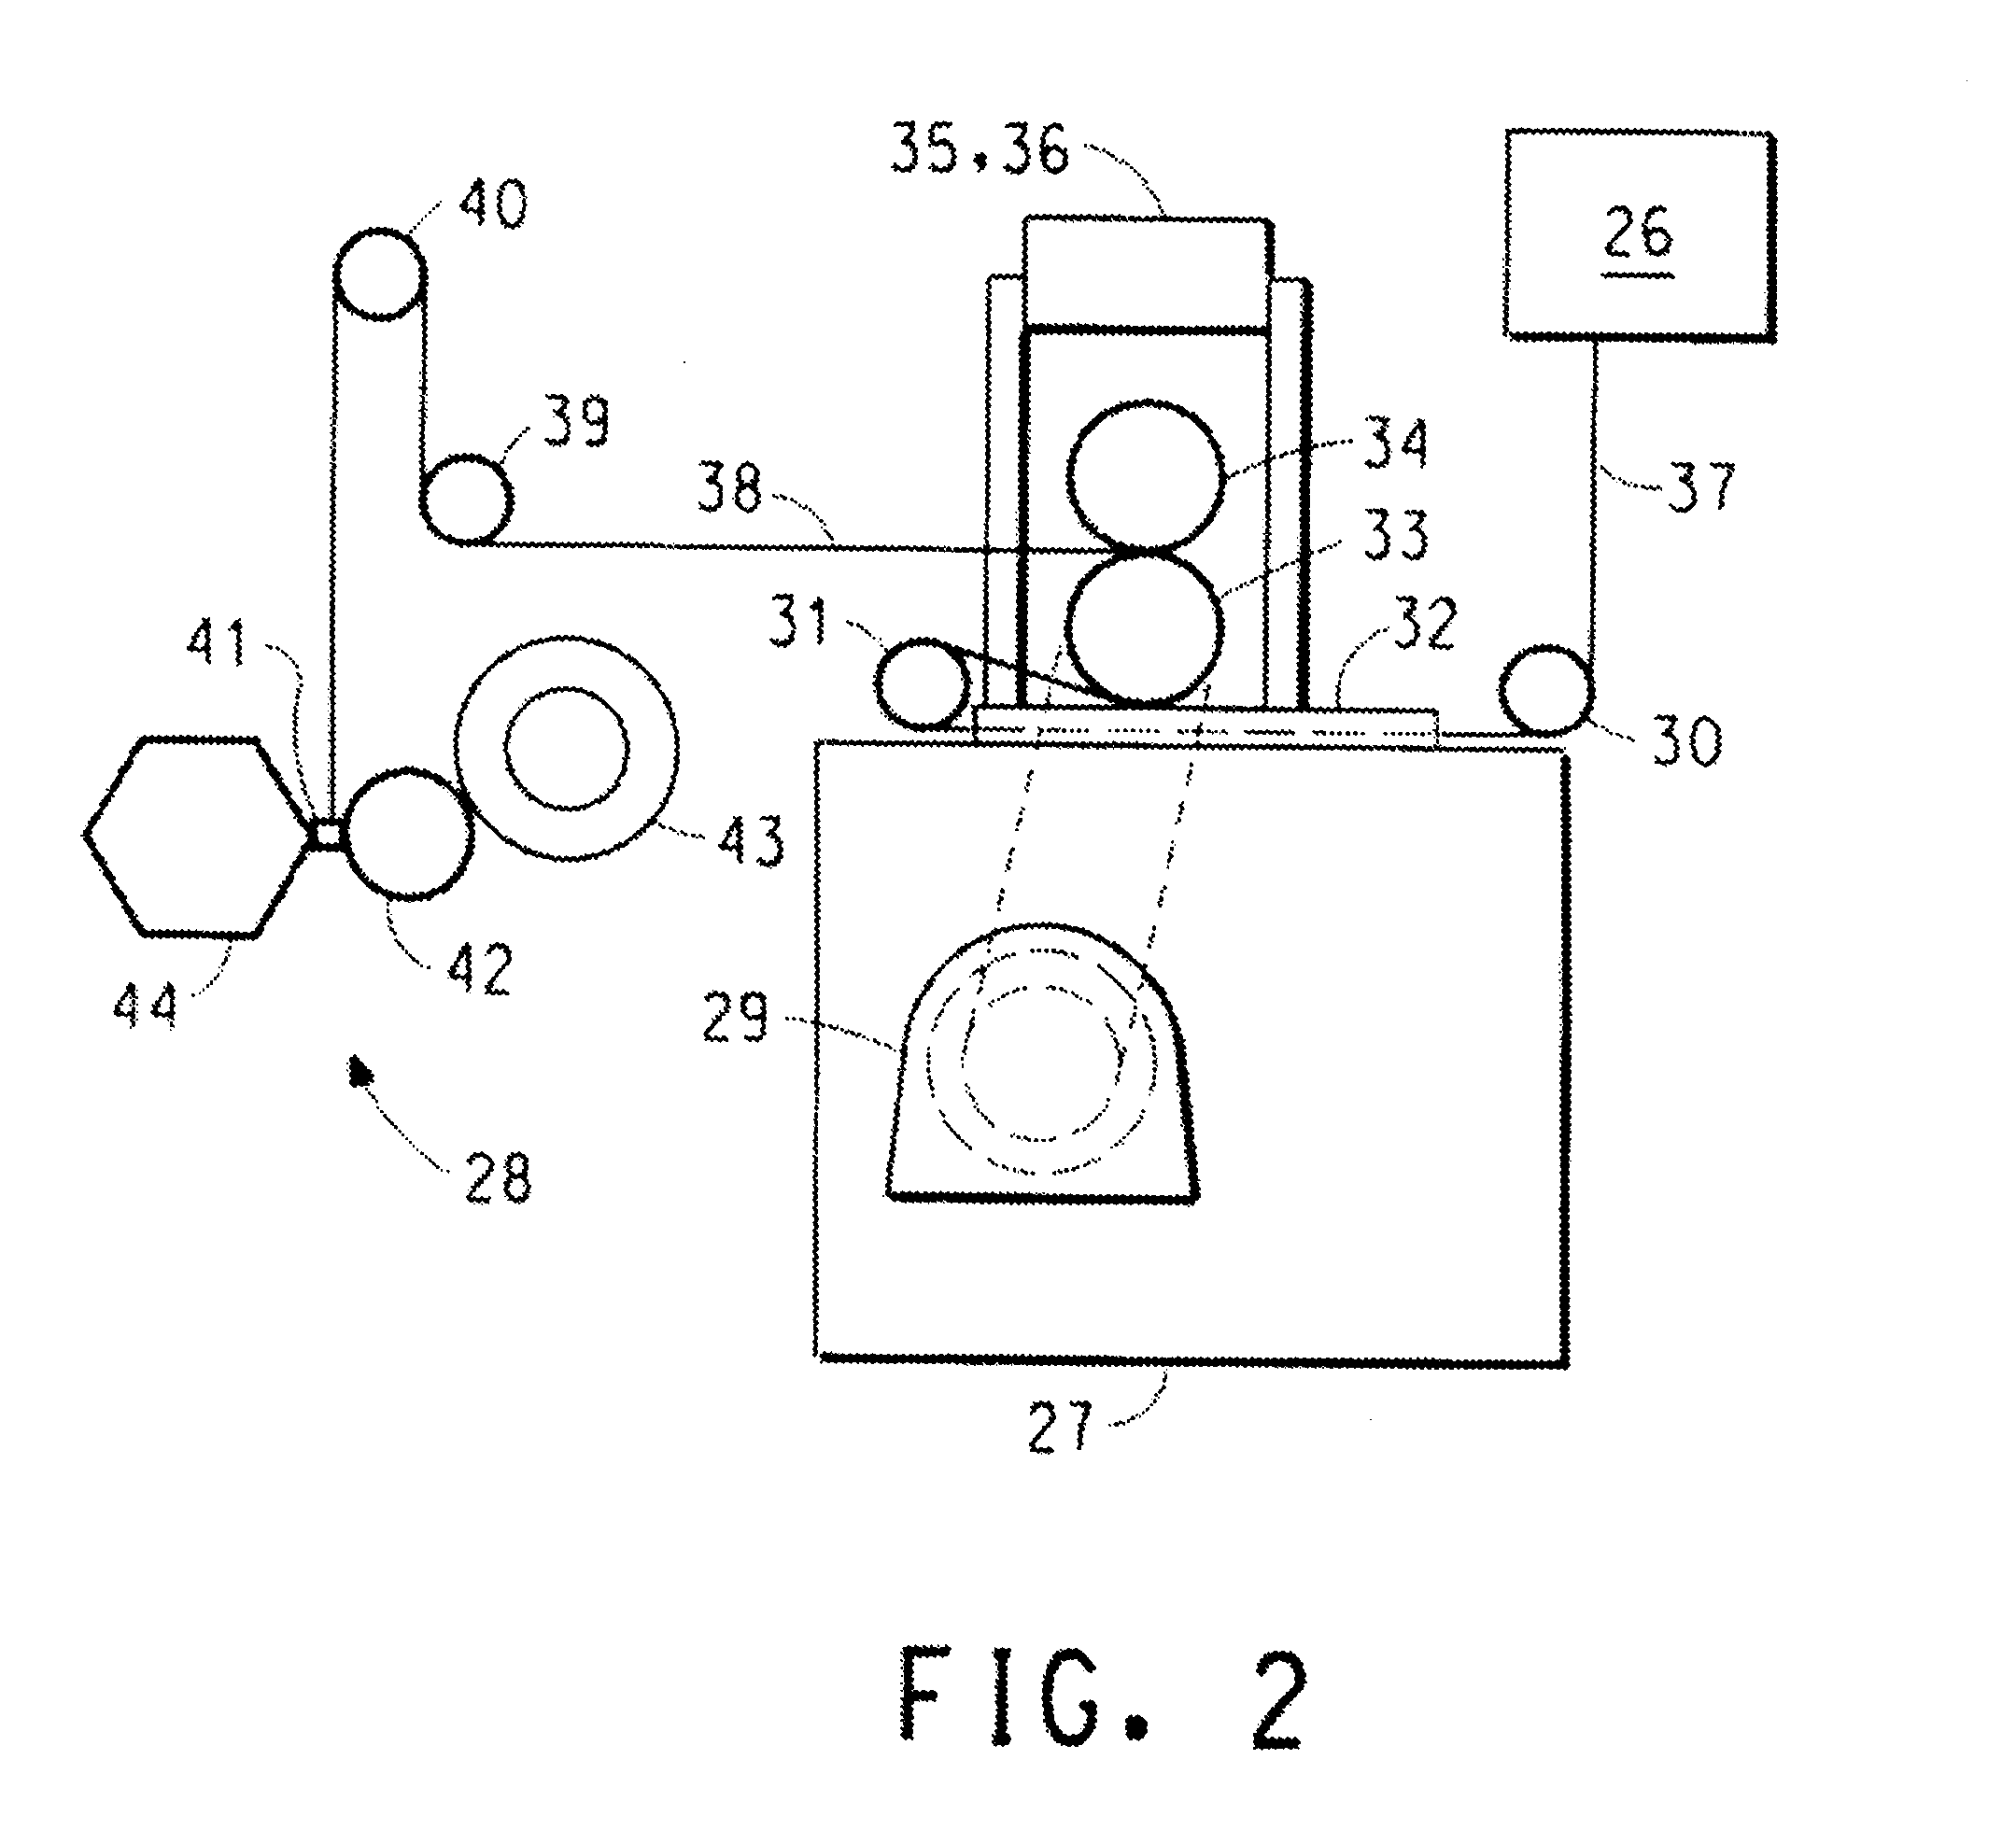 Method for producing a shaped multifilament, non-thermoplastic, elastomeric yarn